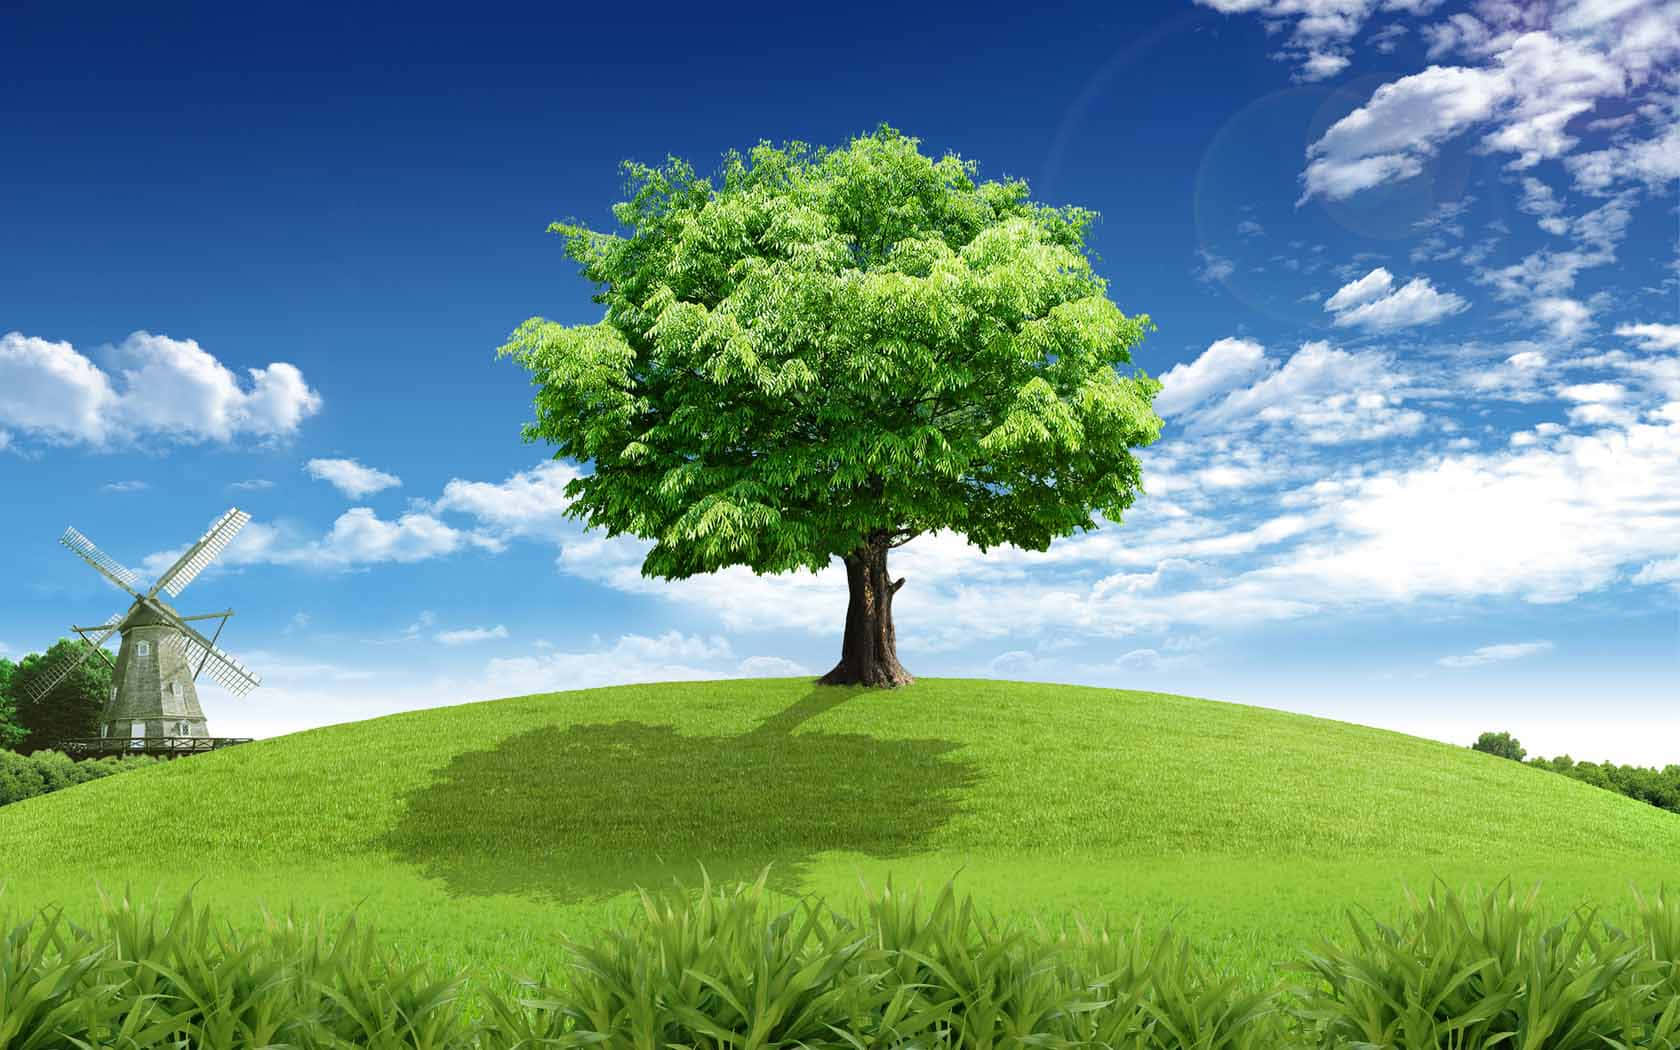 A lush and lively green tree surrounded in a sunny paradise